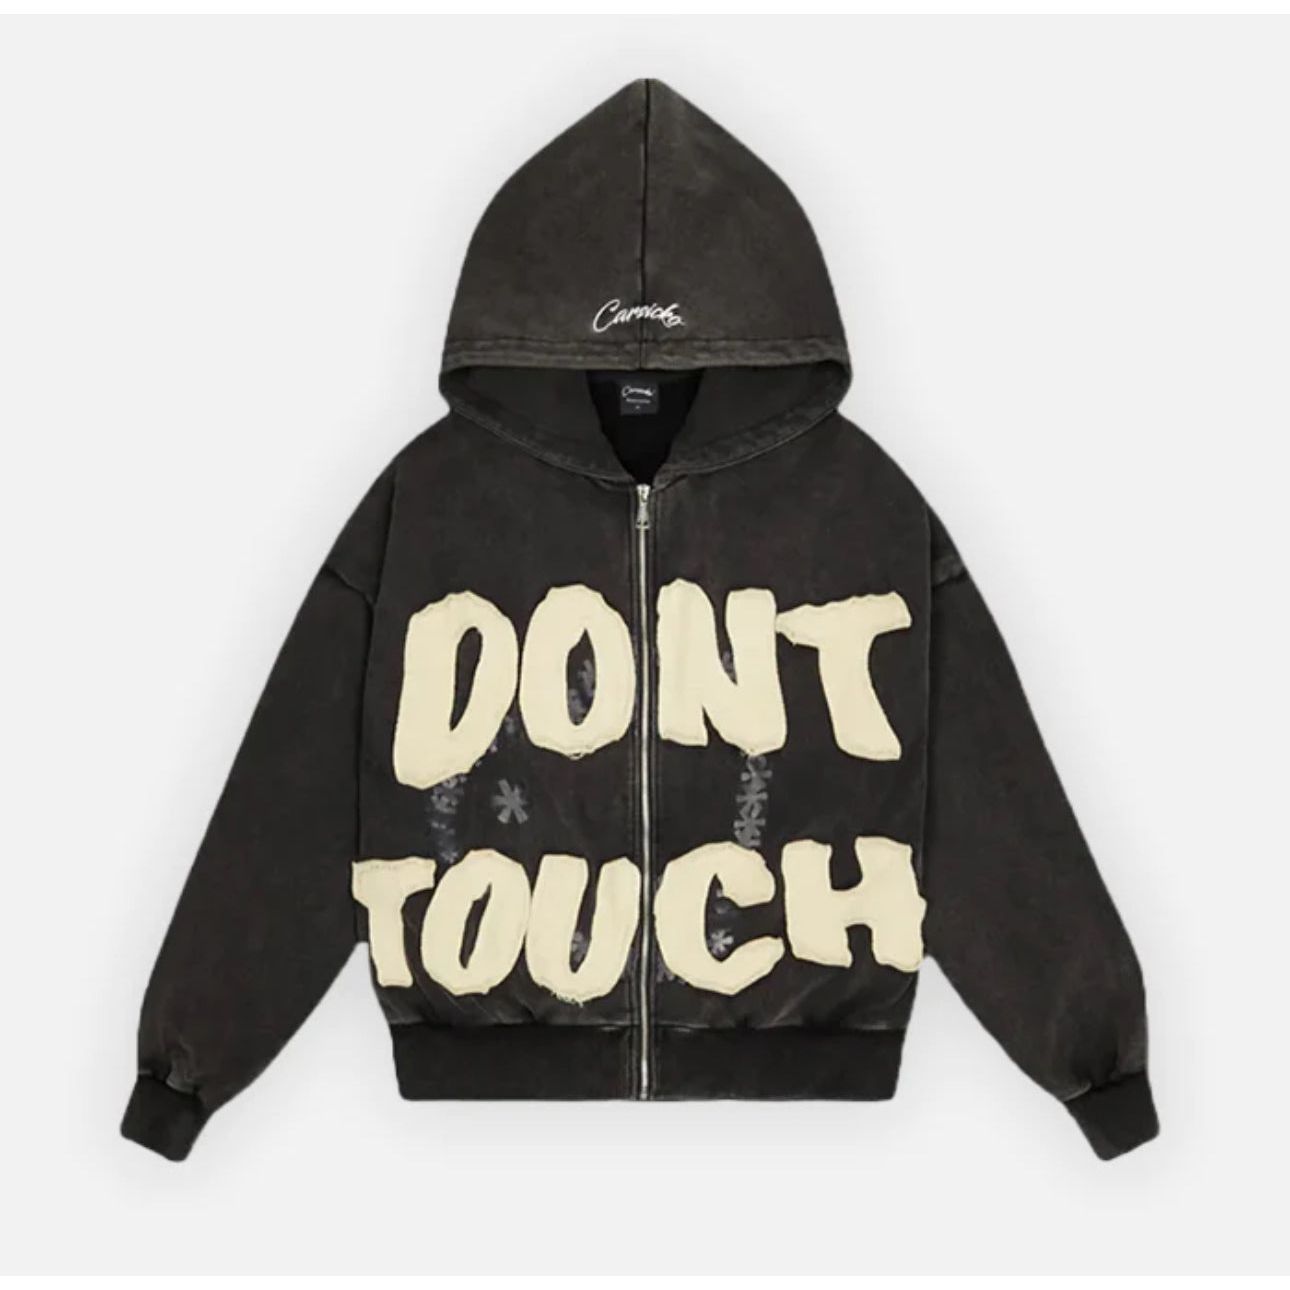 Carsicko Don’t Touch Hoodie - Black/Grey